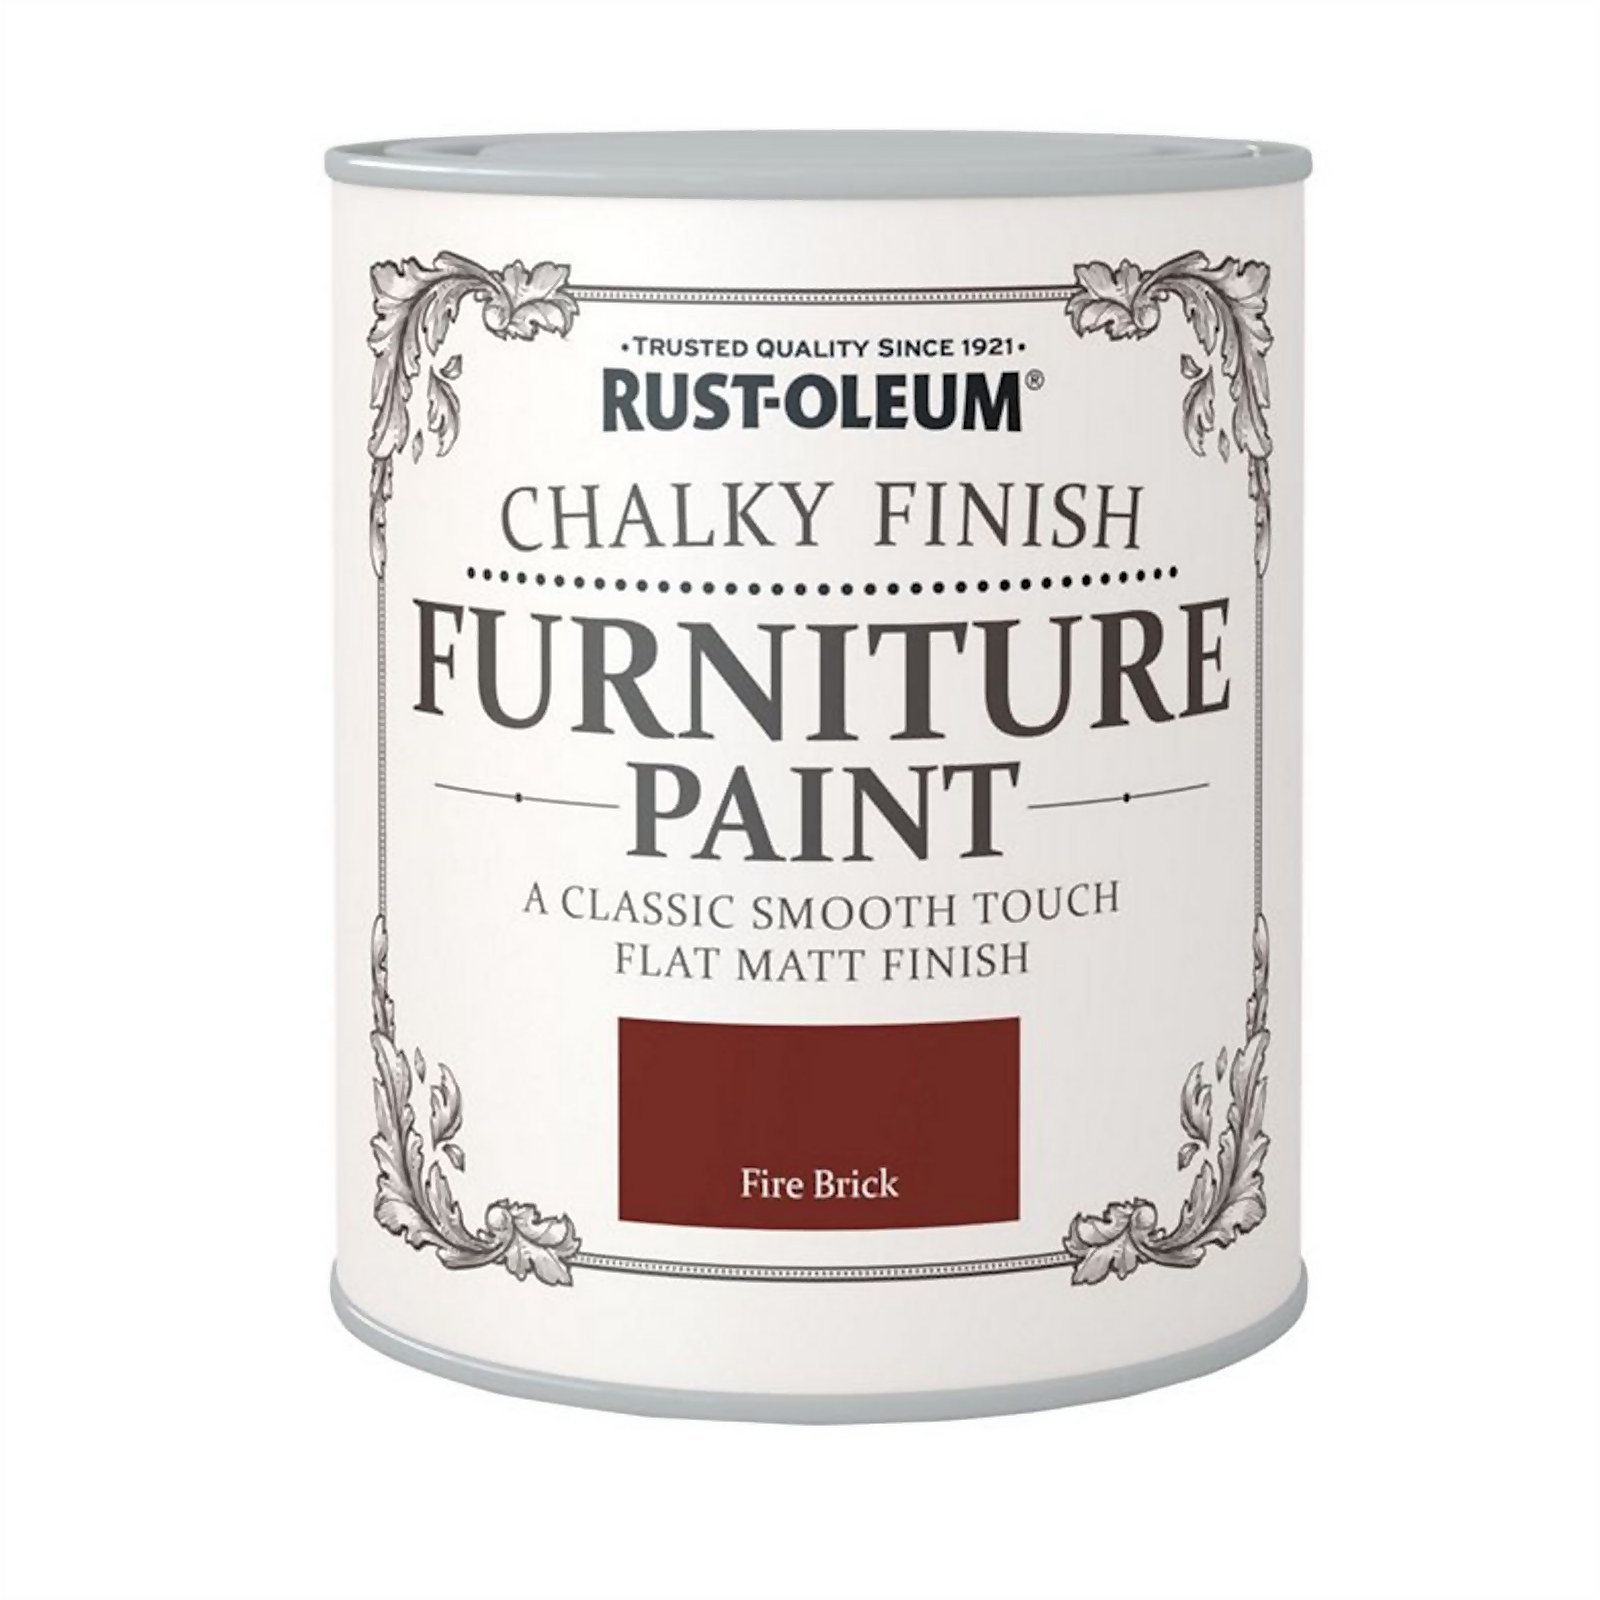 Photo of Rust-oleum Chalky Furniture Paint - Fire Brick - 125ml